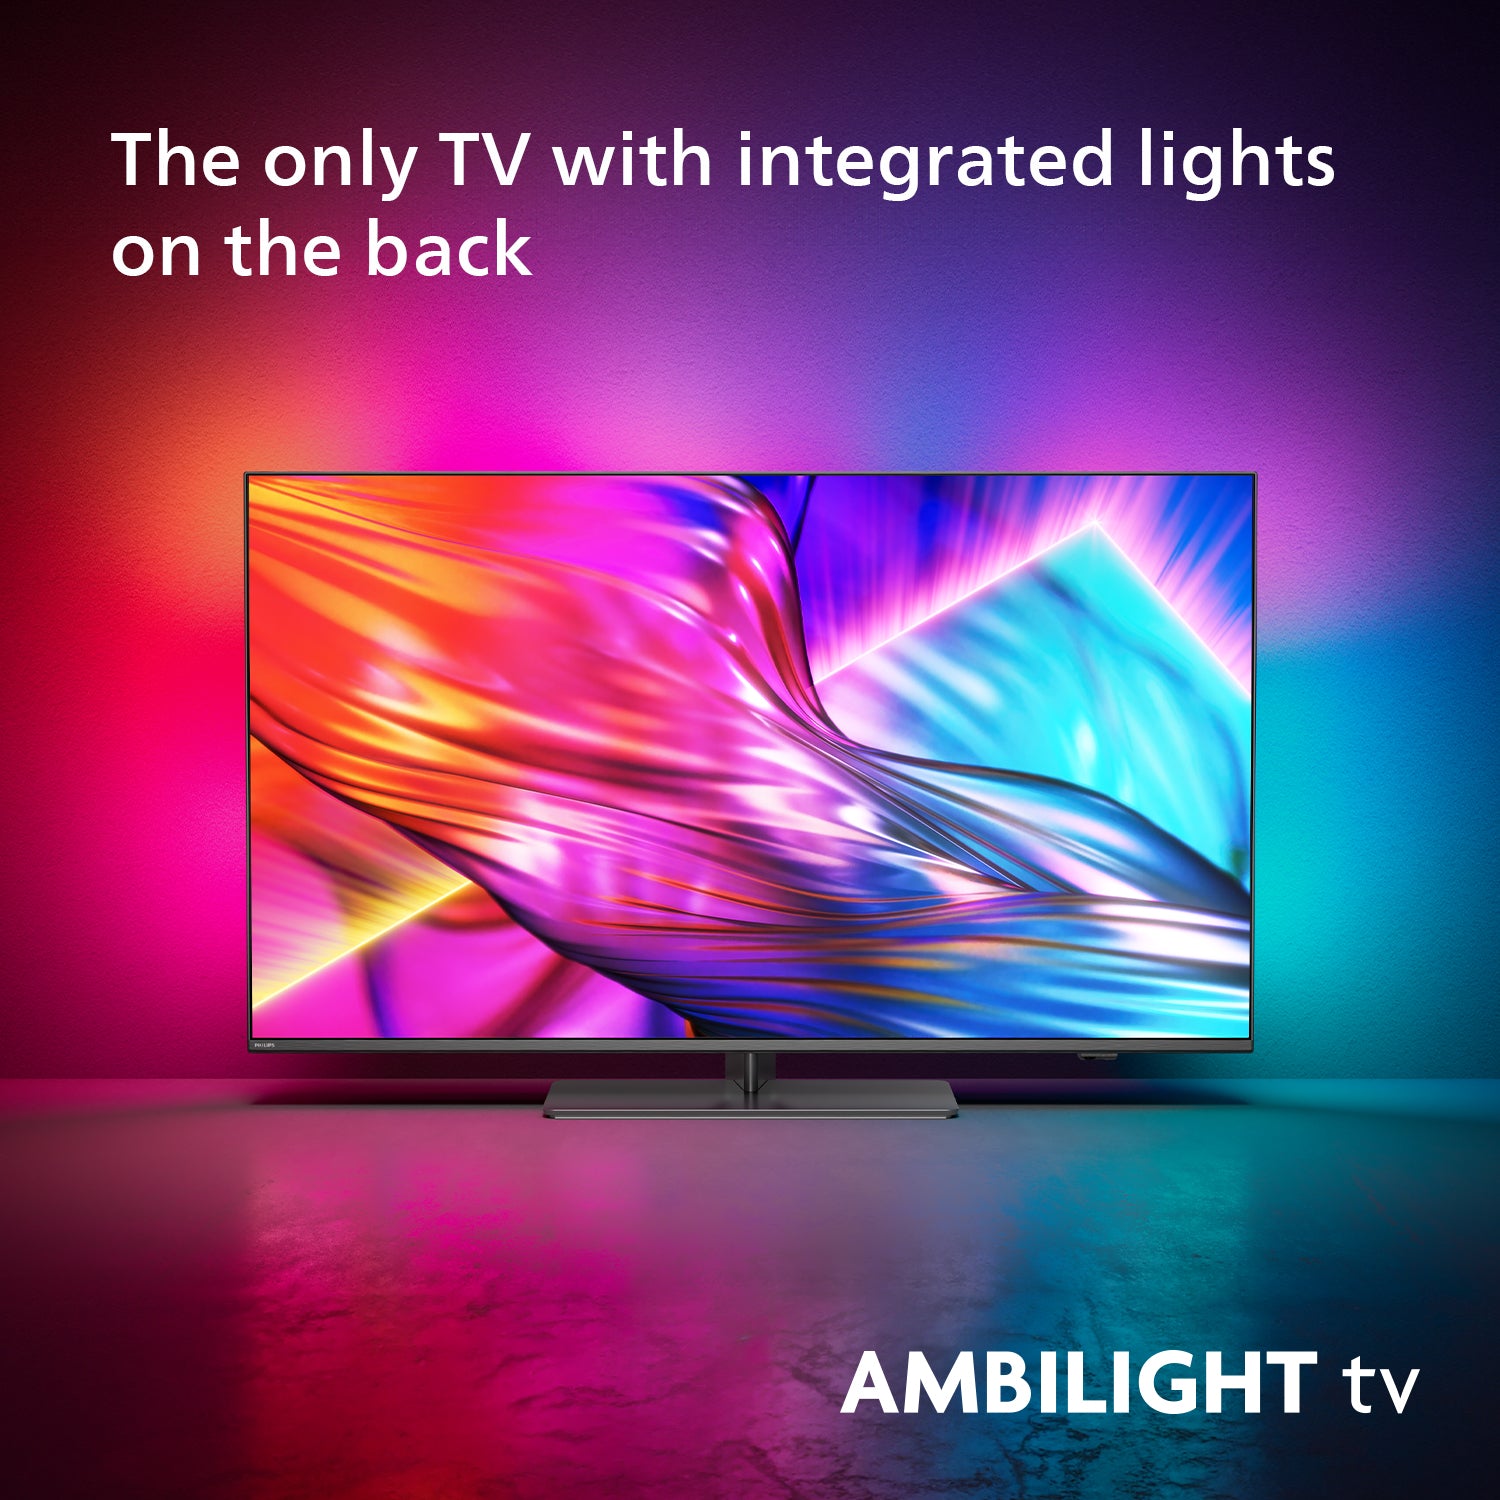 Philips 55PUS8949/12 The One 4K Ambilight TV